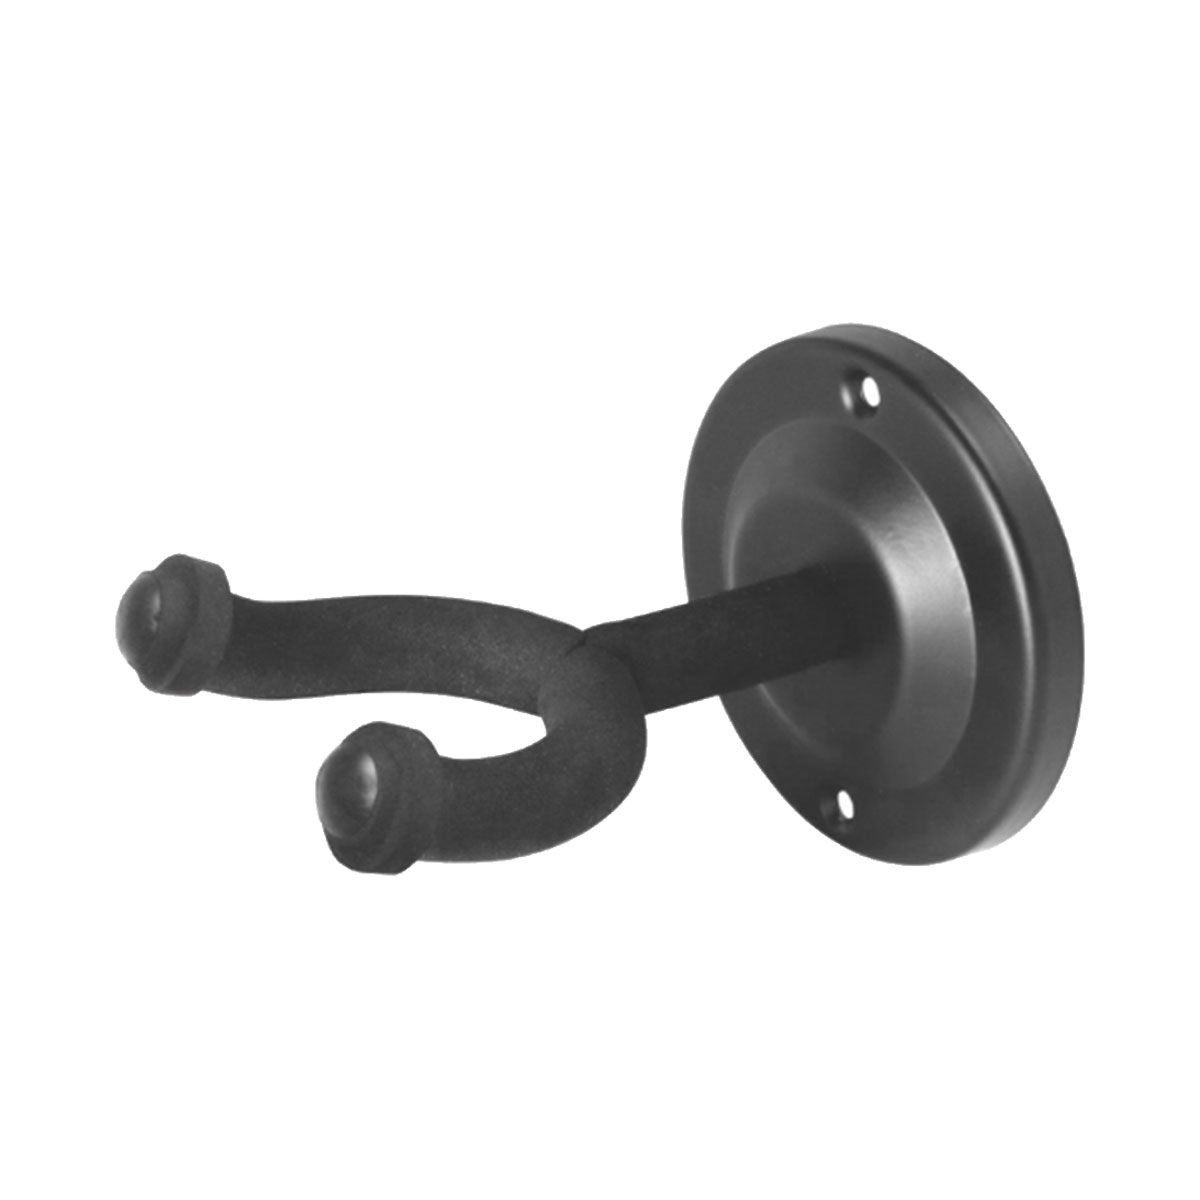 On-Stage GS7640 Round Metal Wall Guitar Hanger<br>GS7640